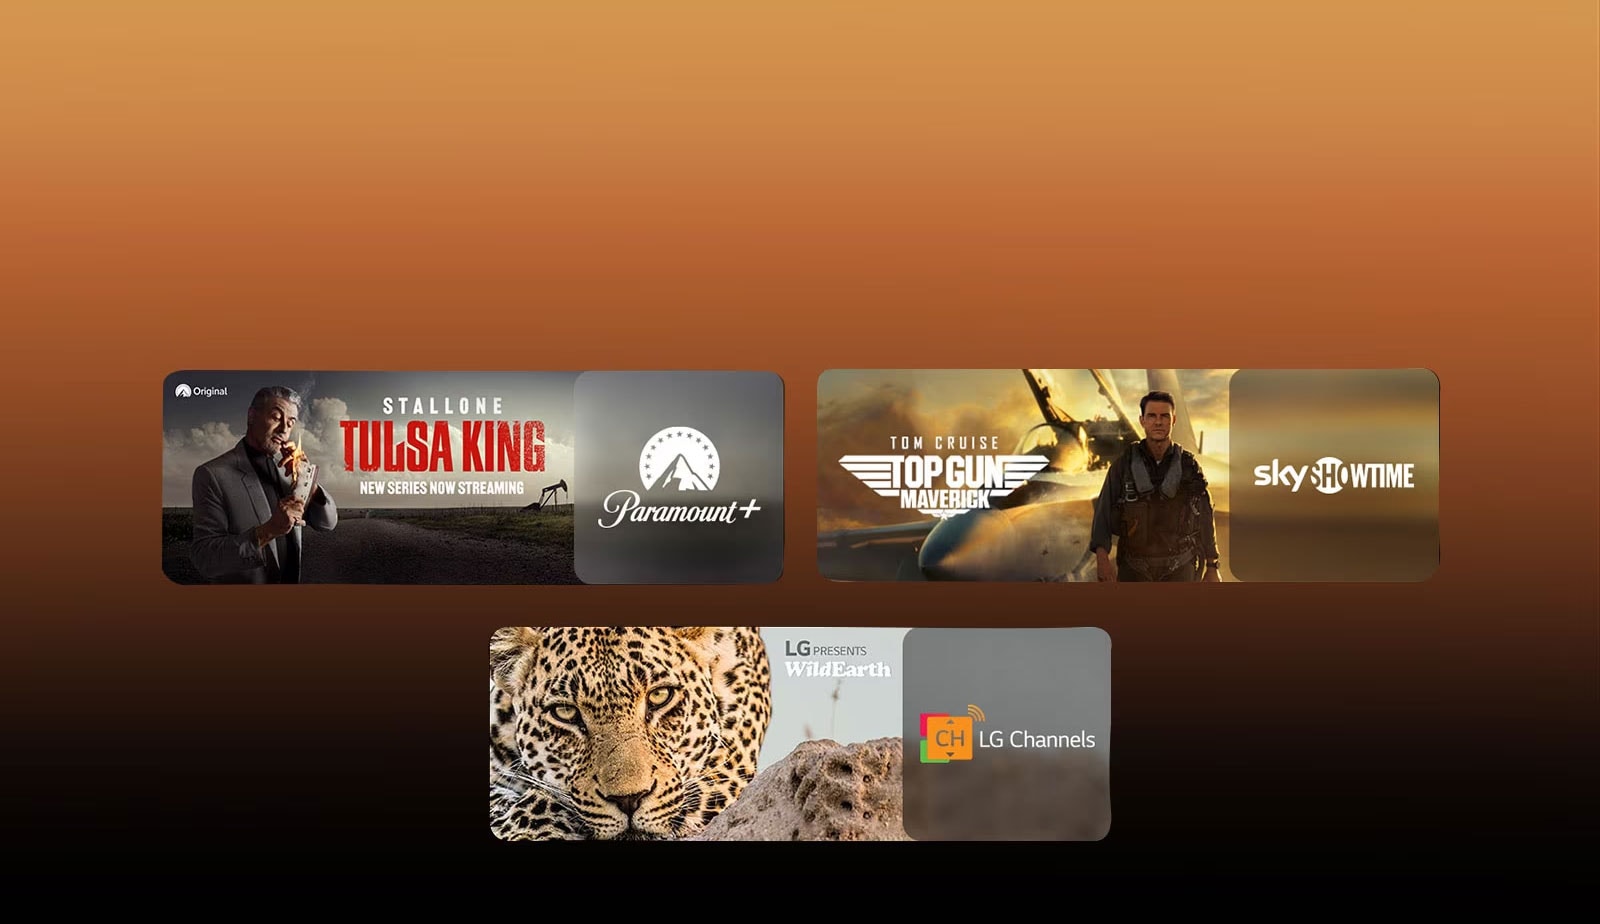 There are logos of streaming service platforms and matching footages right next to each logo. There are images of Paramount+'s Tulsa King , sky showtime's TOP GUN, and LG CHANNELS' leopard.